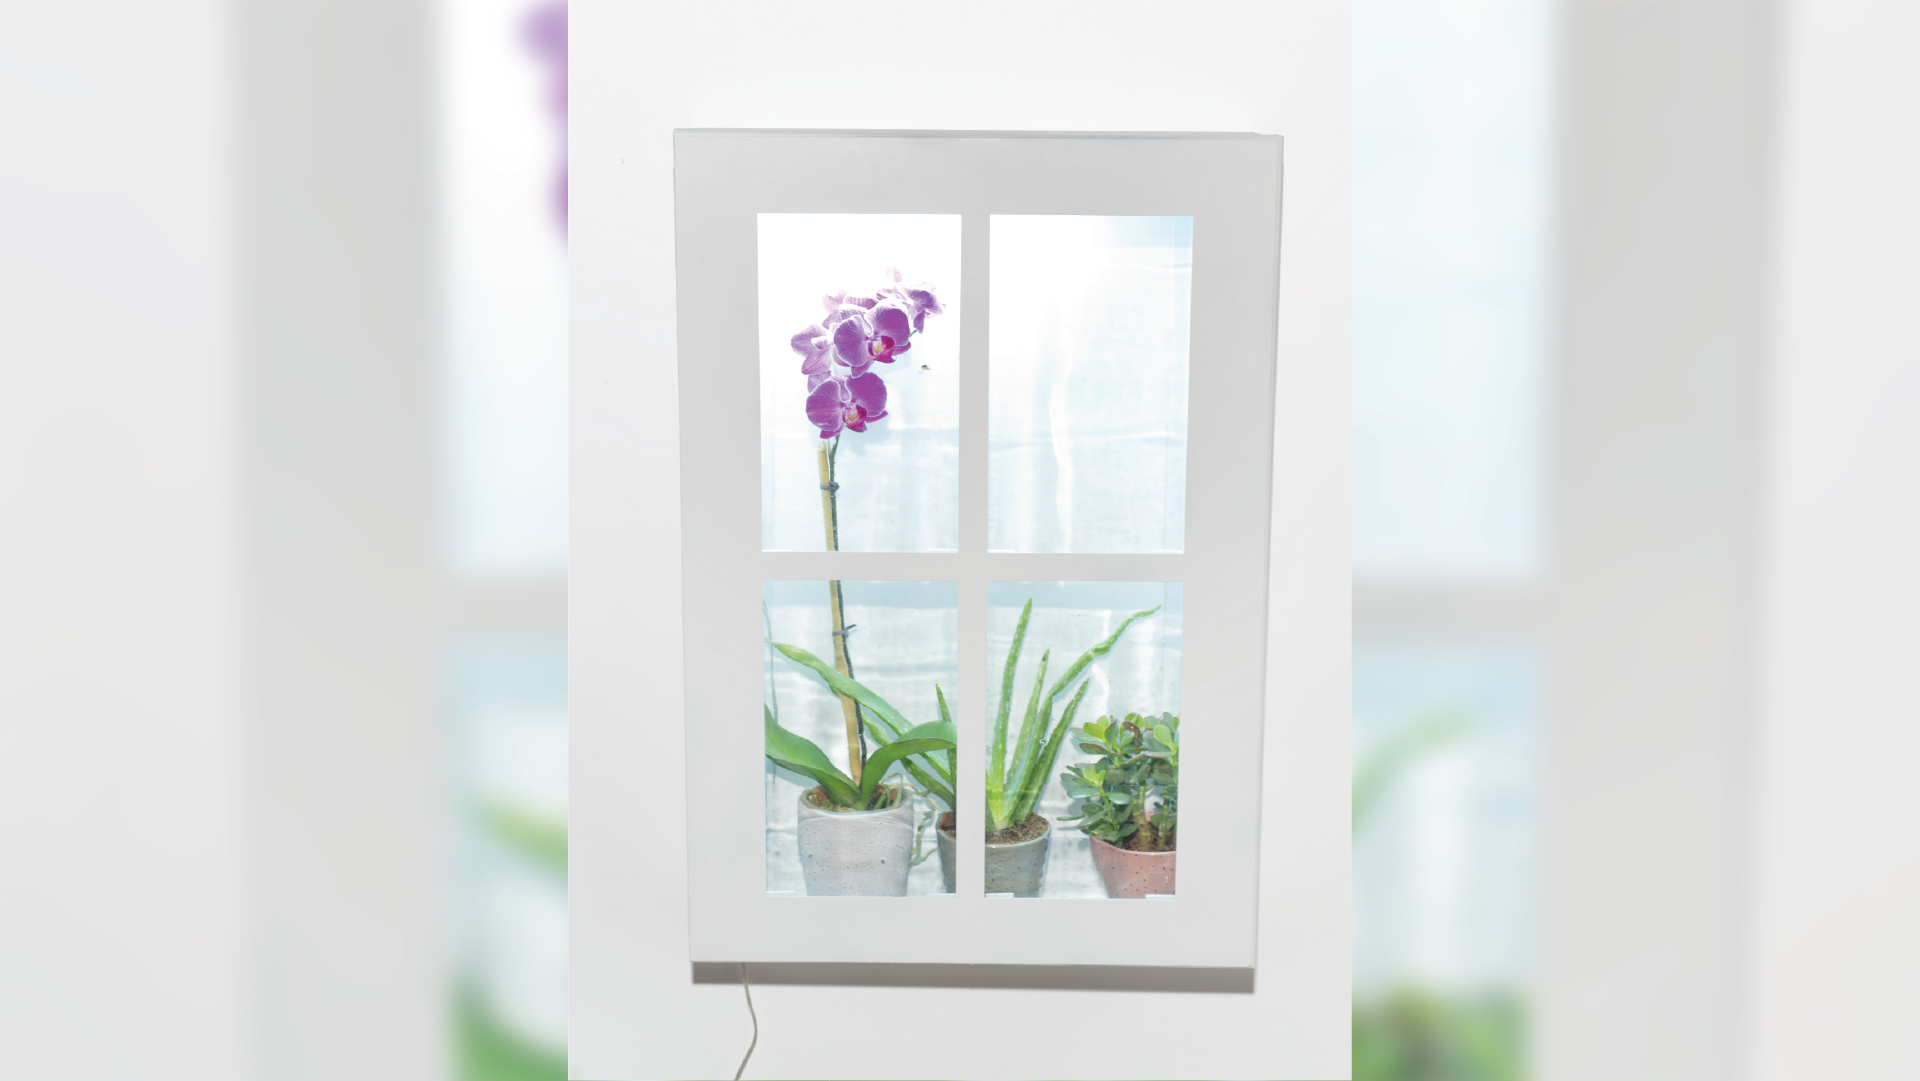 A frame fixed on the wall with a door resembling a window. Inside the frame there's a light source turned on, and plant vases with a big purple flower.